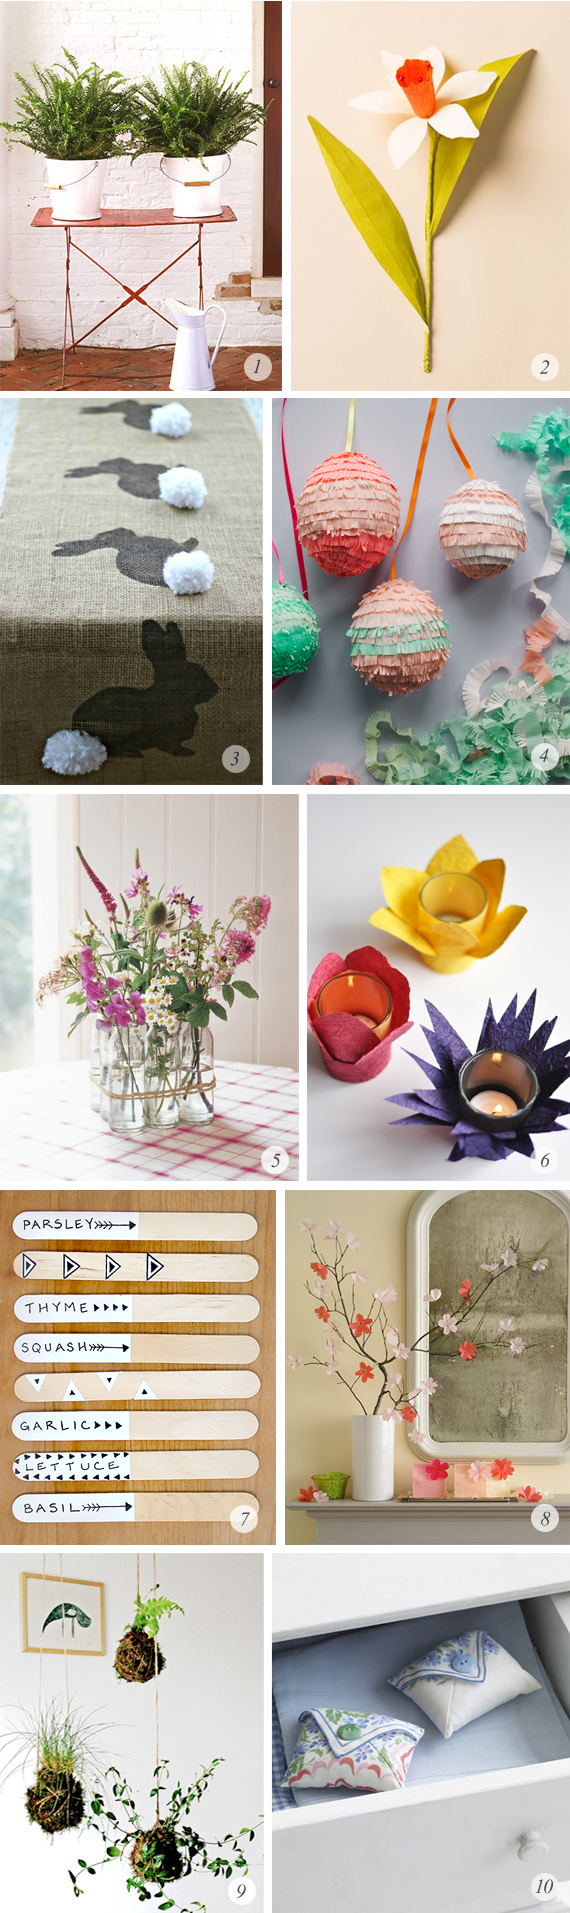 10 Great Spring Inspired DIY Projects // Bubby and Bean